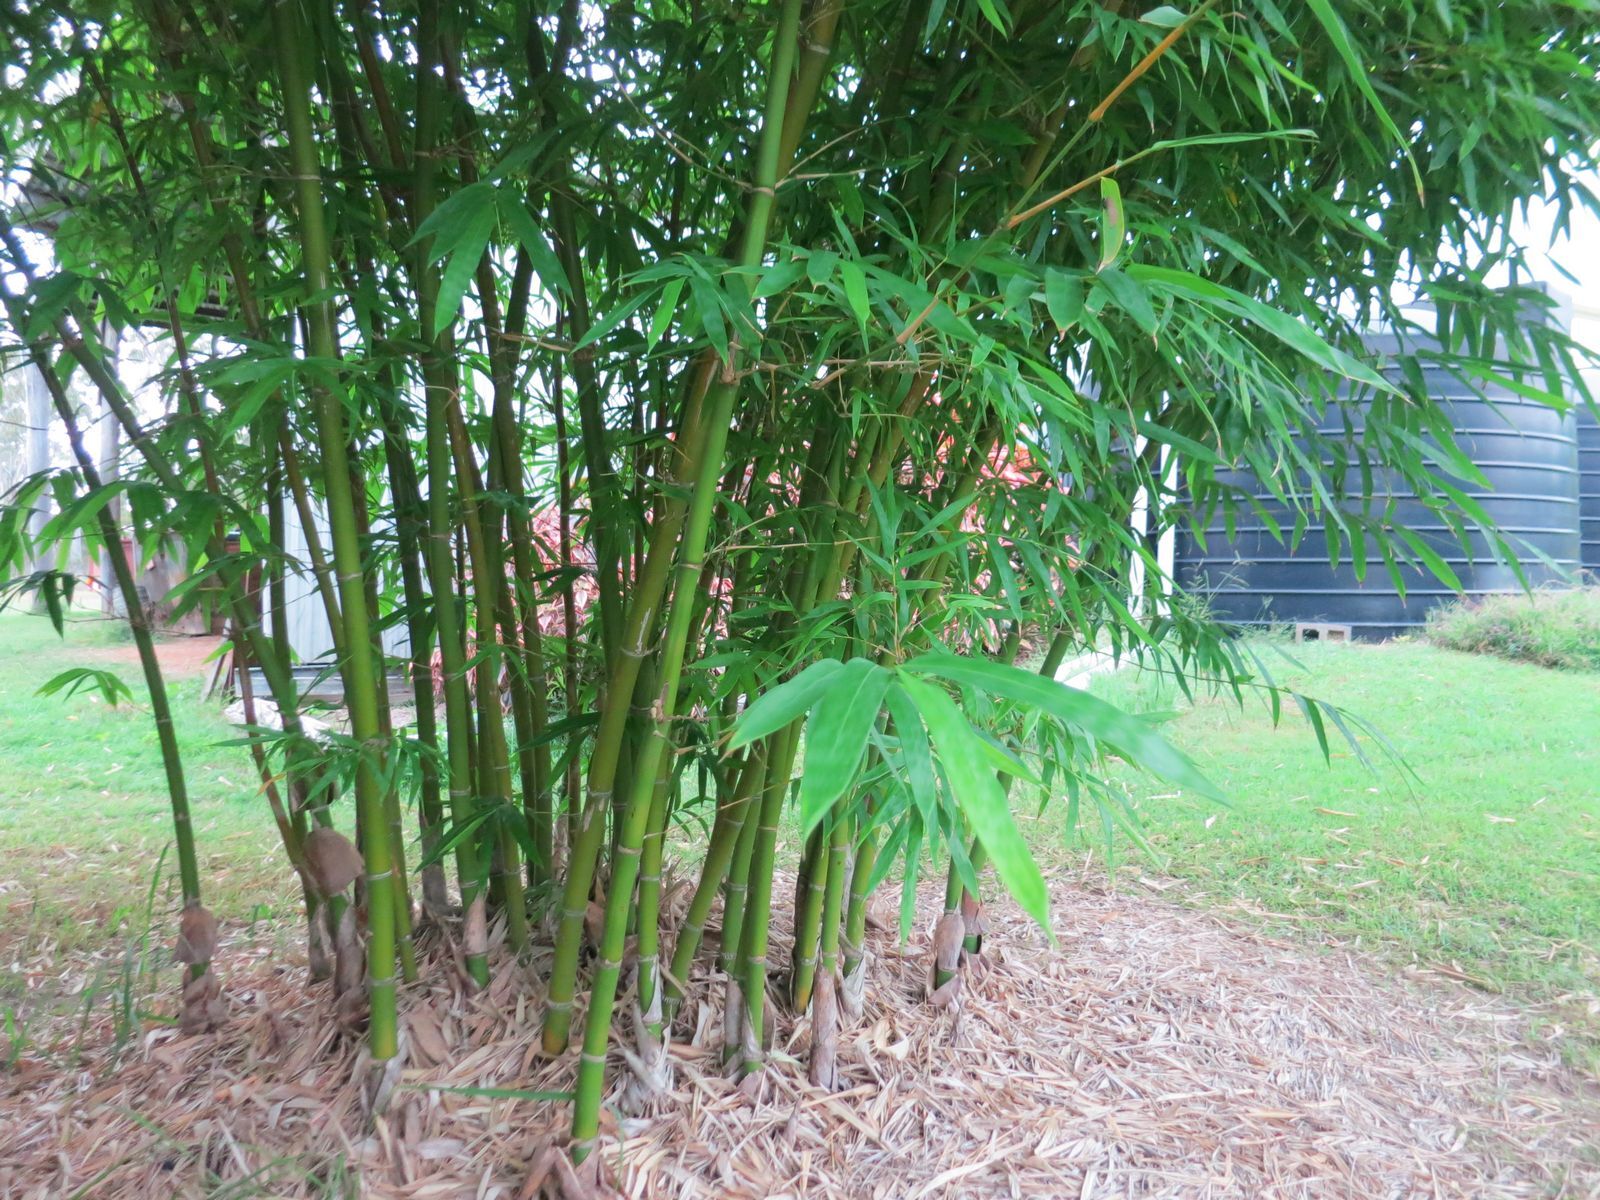 Privacy screen using bamboo plants - Malay Dwarf Green bamboo plant